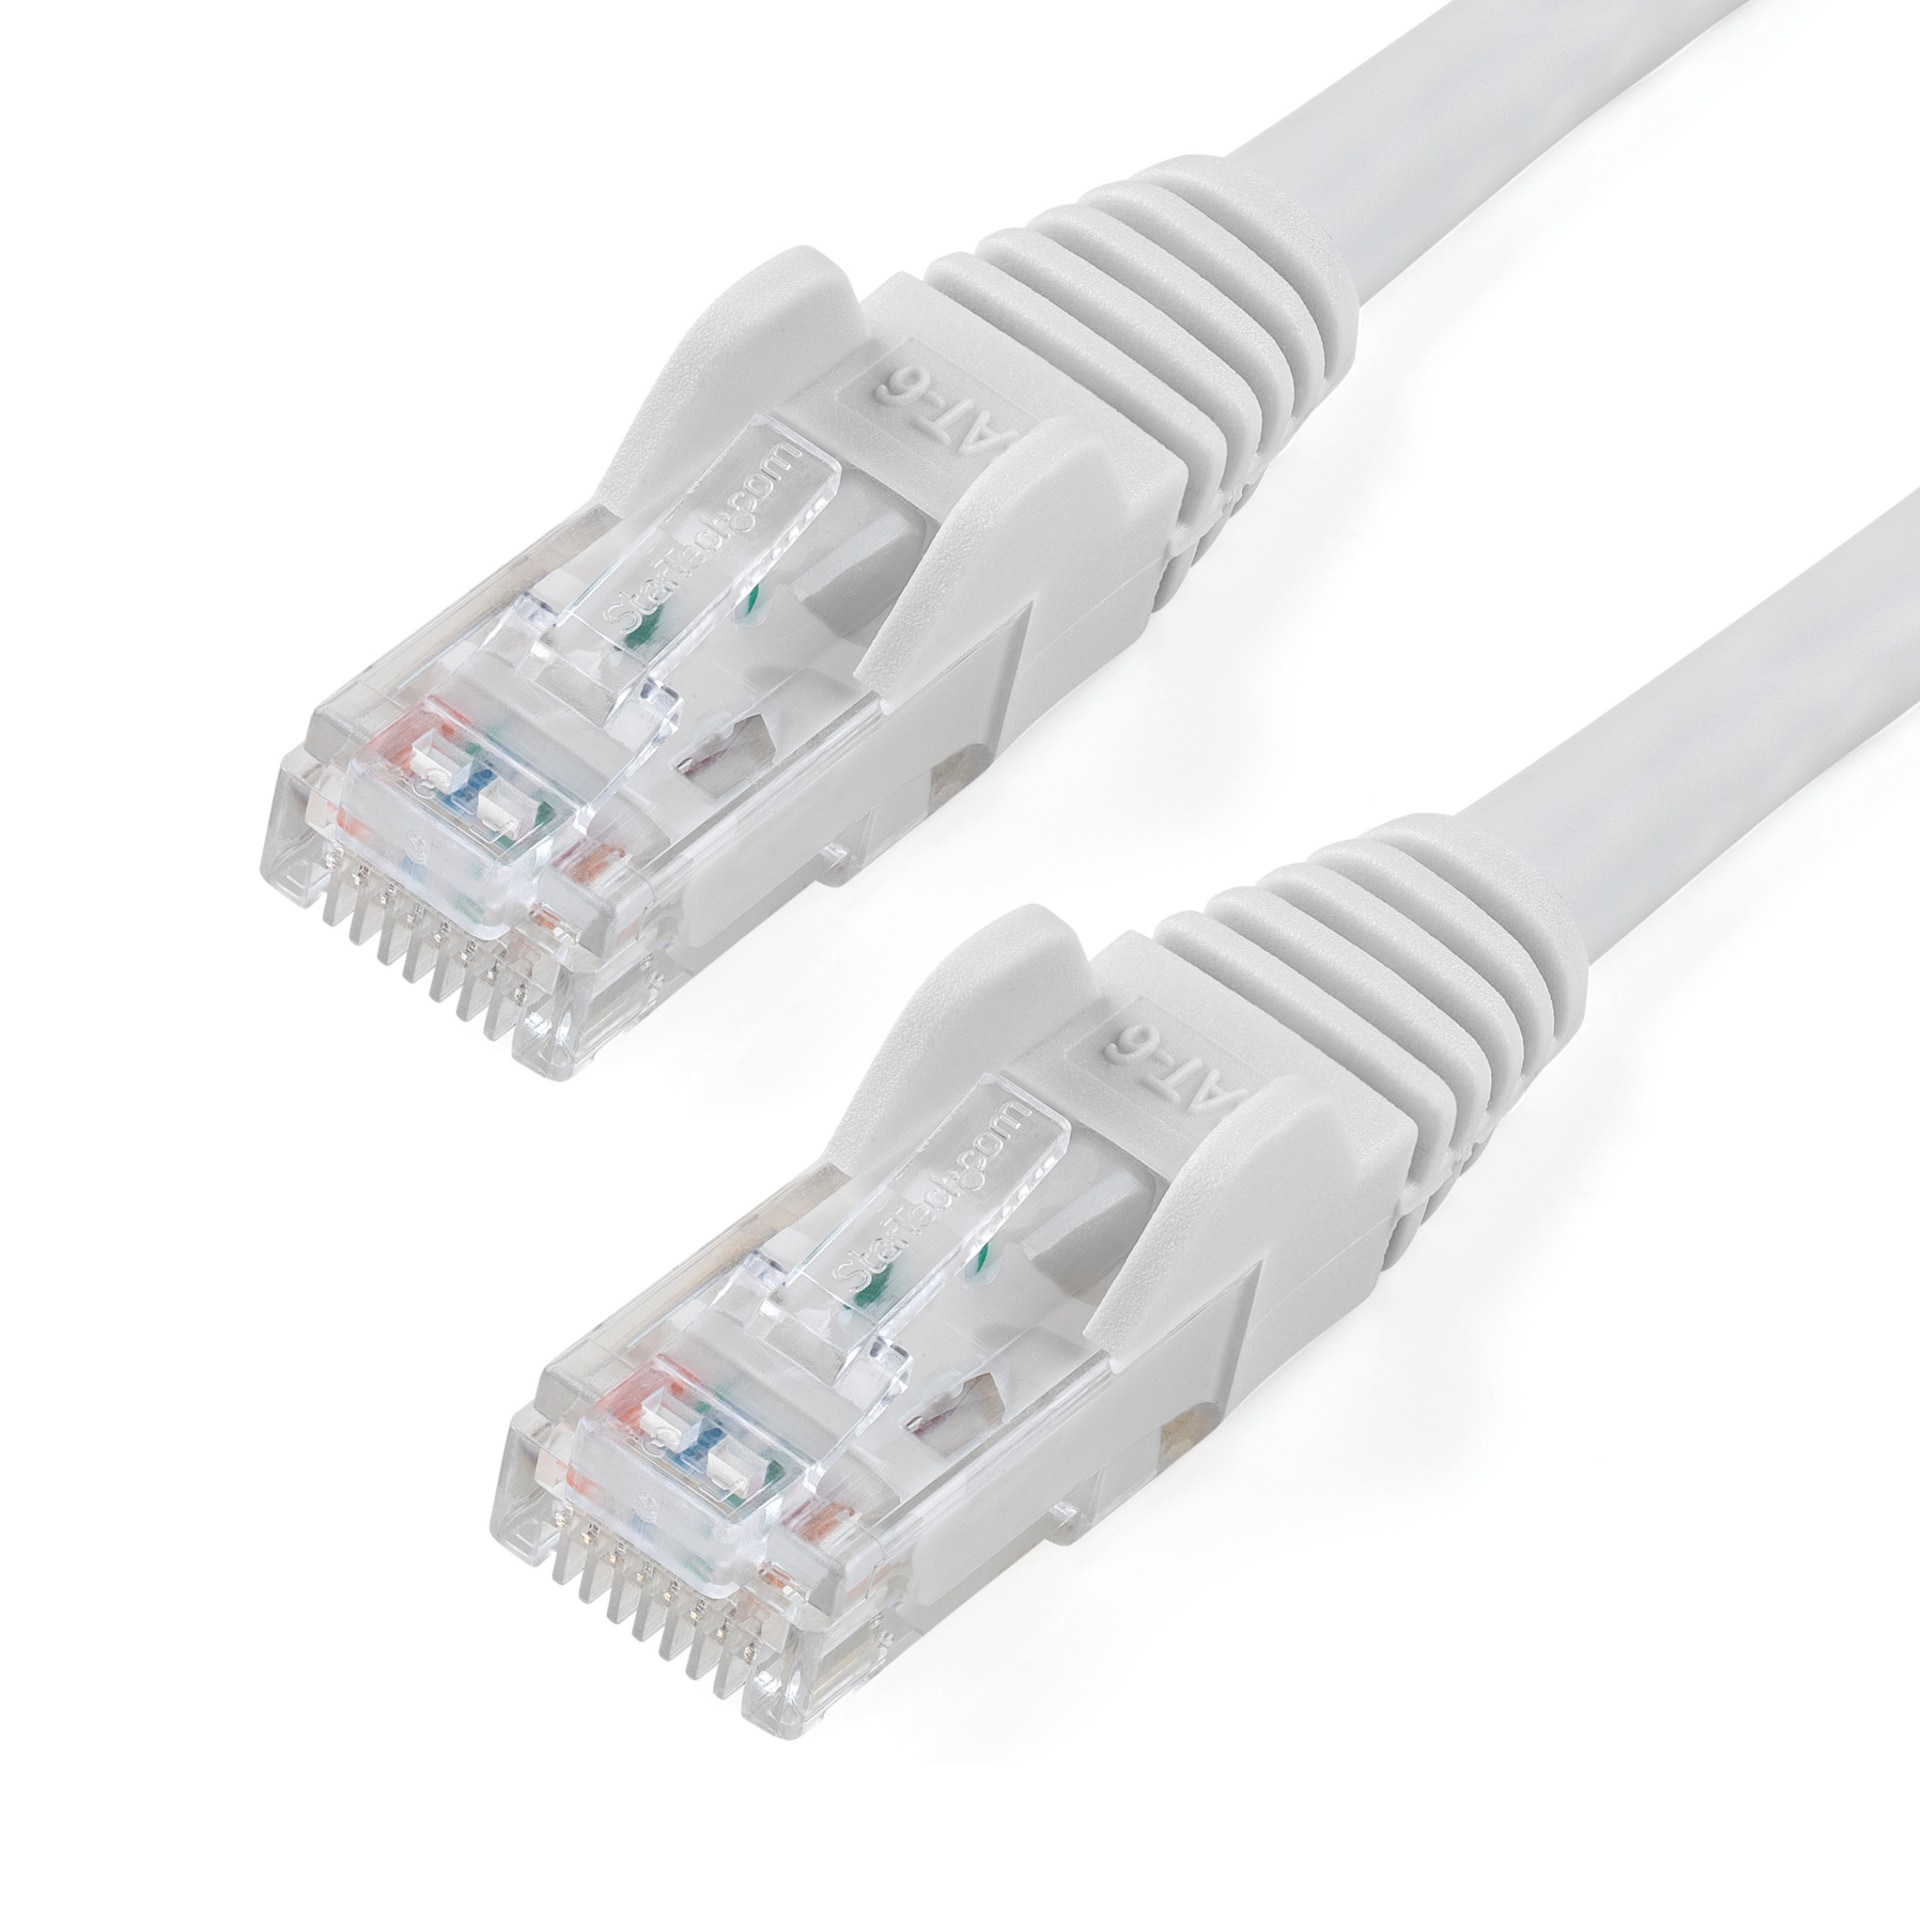 StarTech.com CAT6 Ethernet Cable 20' White 650MHz PoE Snagless Patch Cord